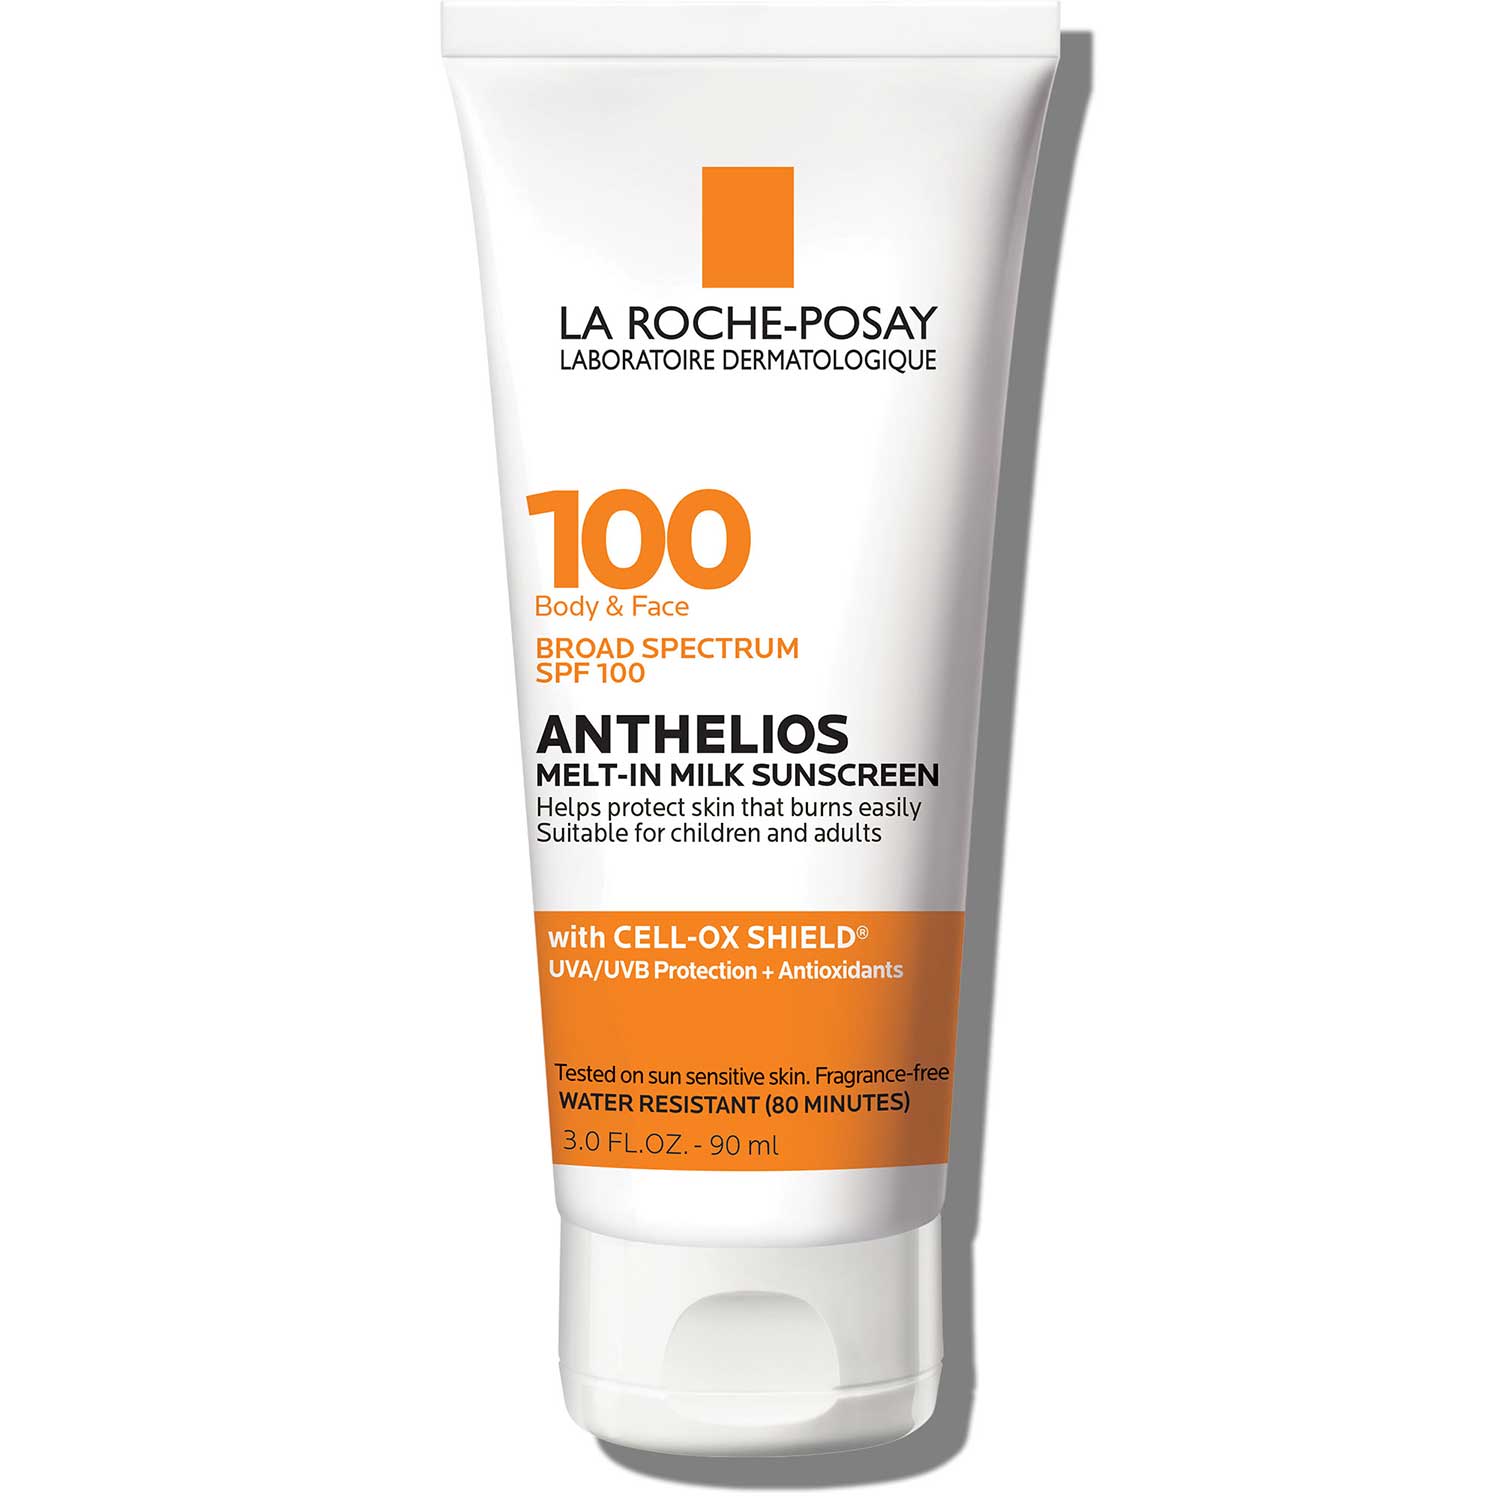 2432 - Anthelios Melt-In Milk Sunscreen for Face & Body SPF 100